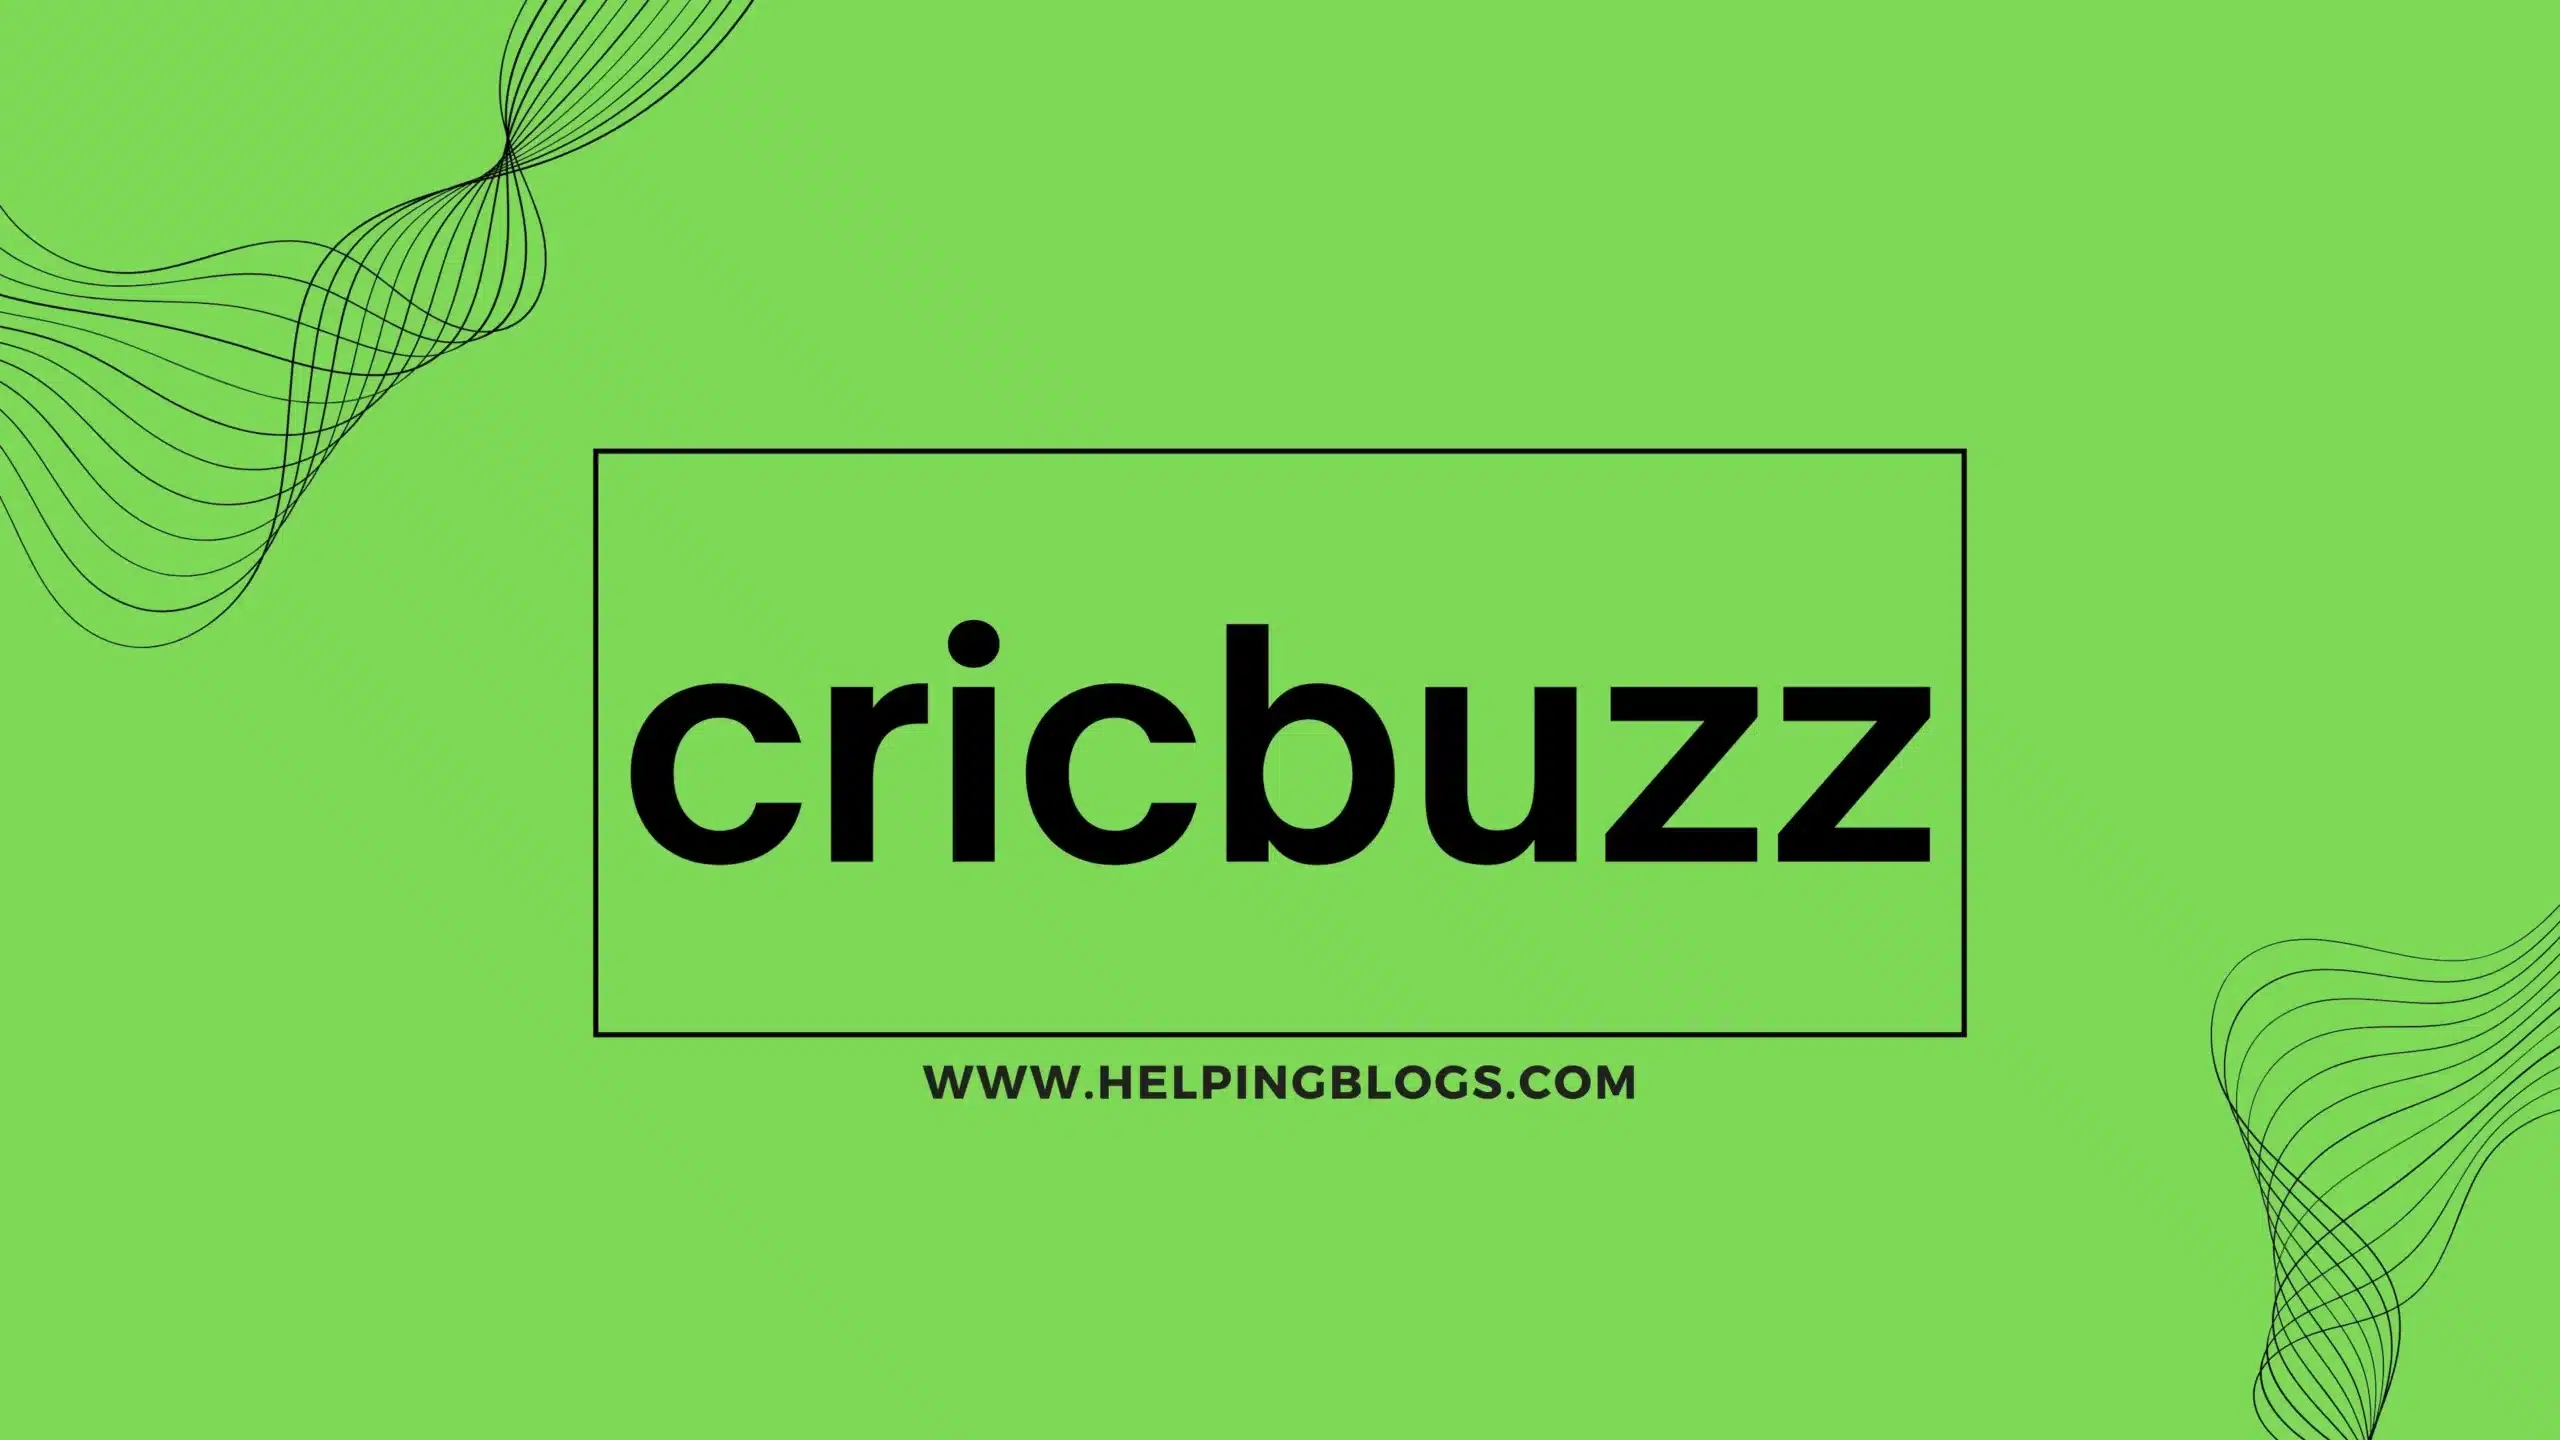 The Remarkable Journey of Cricbuzz